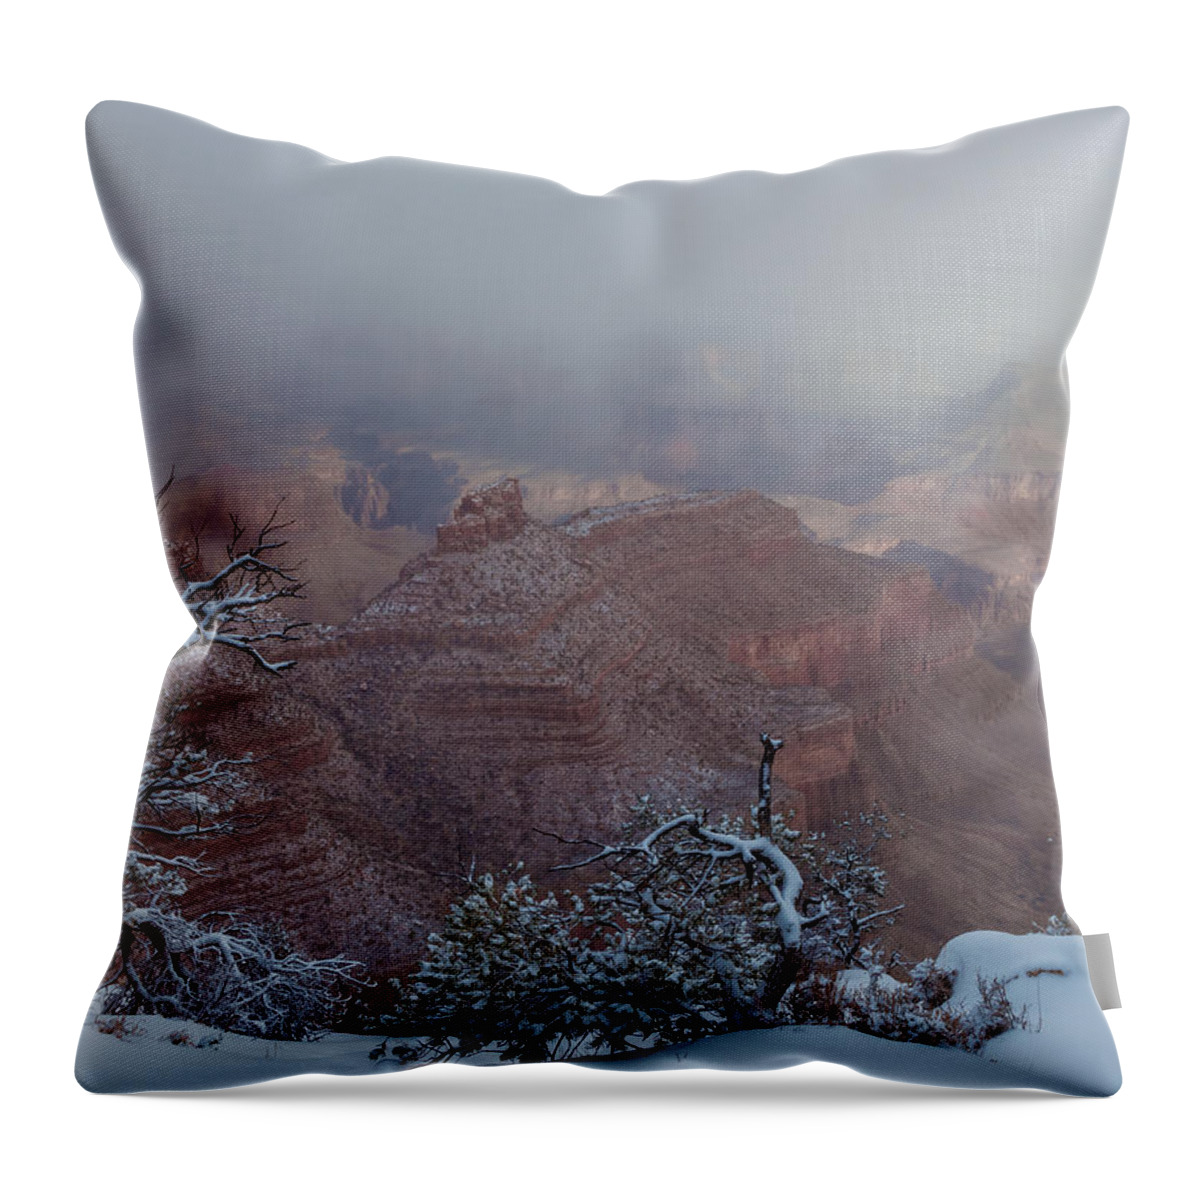 Landscape Throw Pillow featuring the photograph Overlook by Jonathan Nguyen